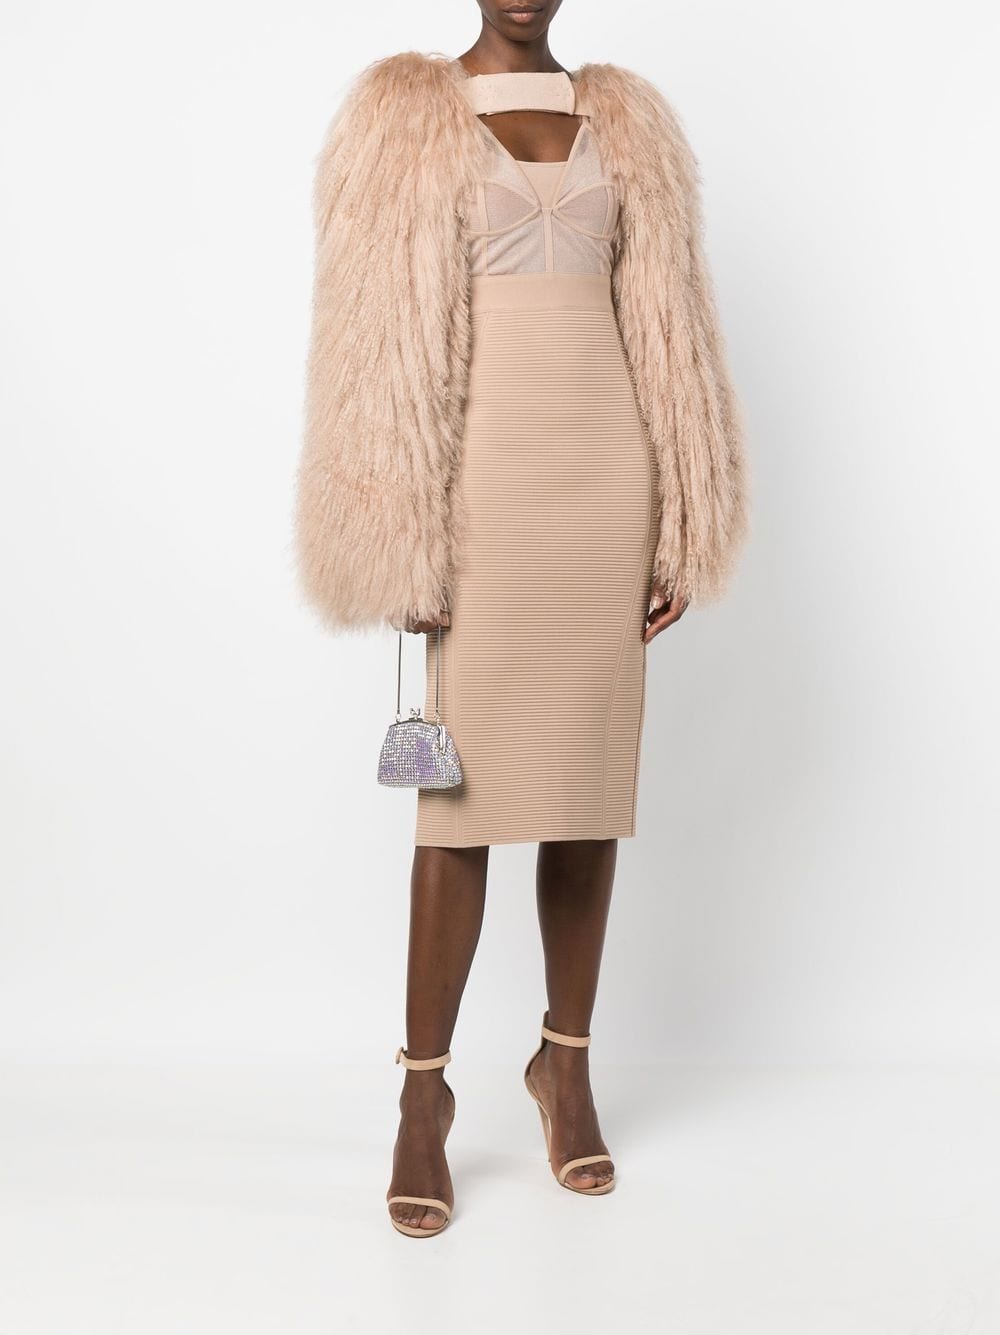 and from powder long ANDREADAMO jacket faux-fur cropped, sleeves fastening, touch-strap faux-fur bolero detailing, sleeved front featuring